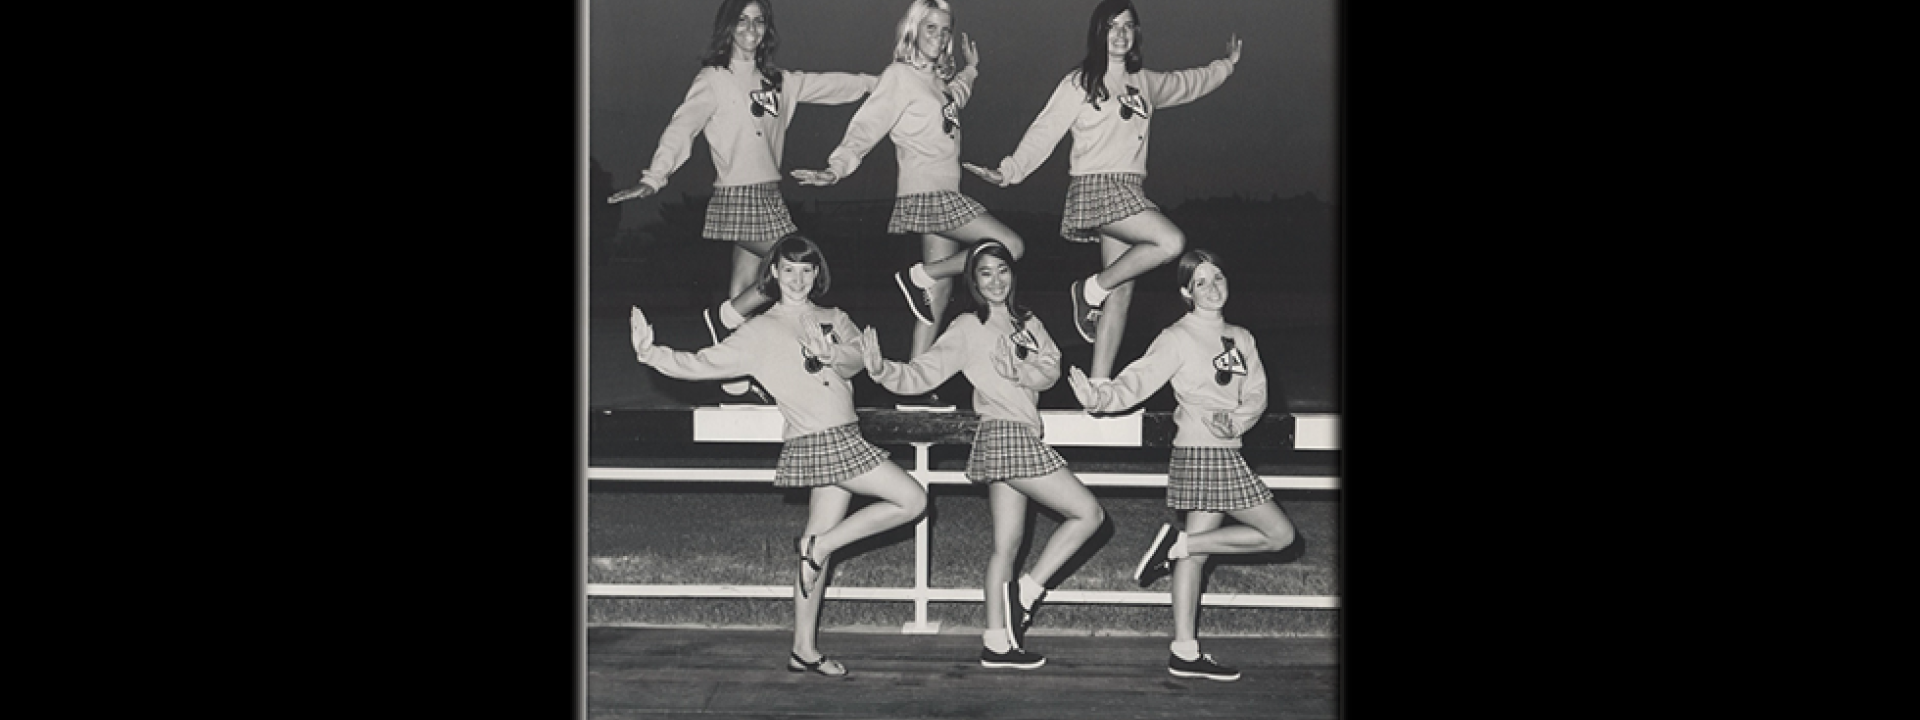 Six Cal State LA cheerleaders posing and smiling during the 1960s